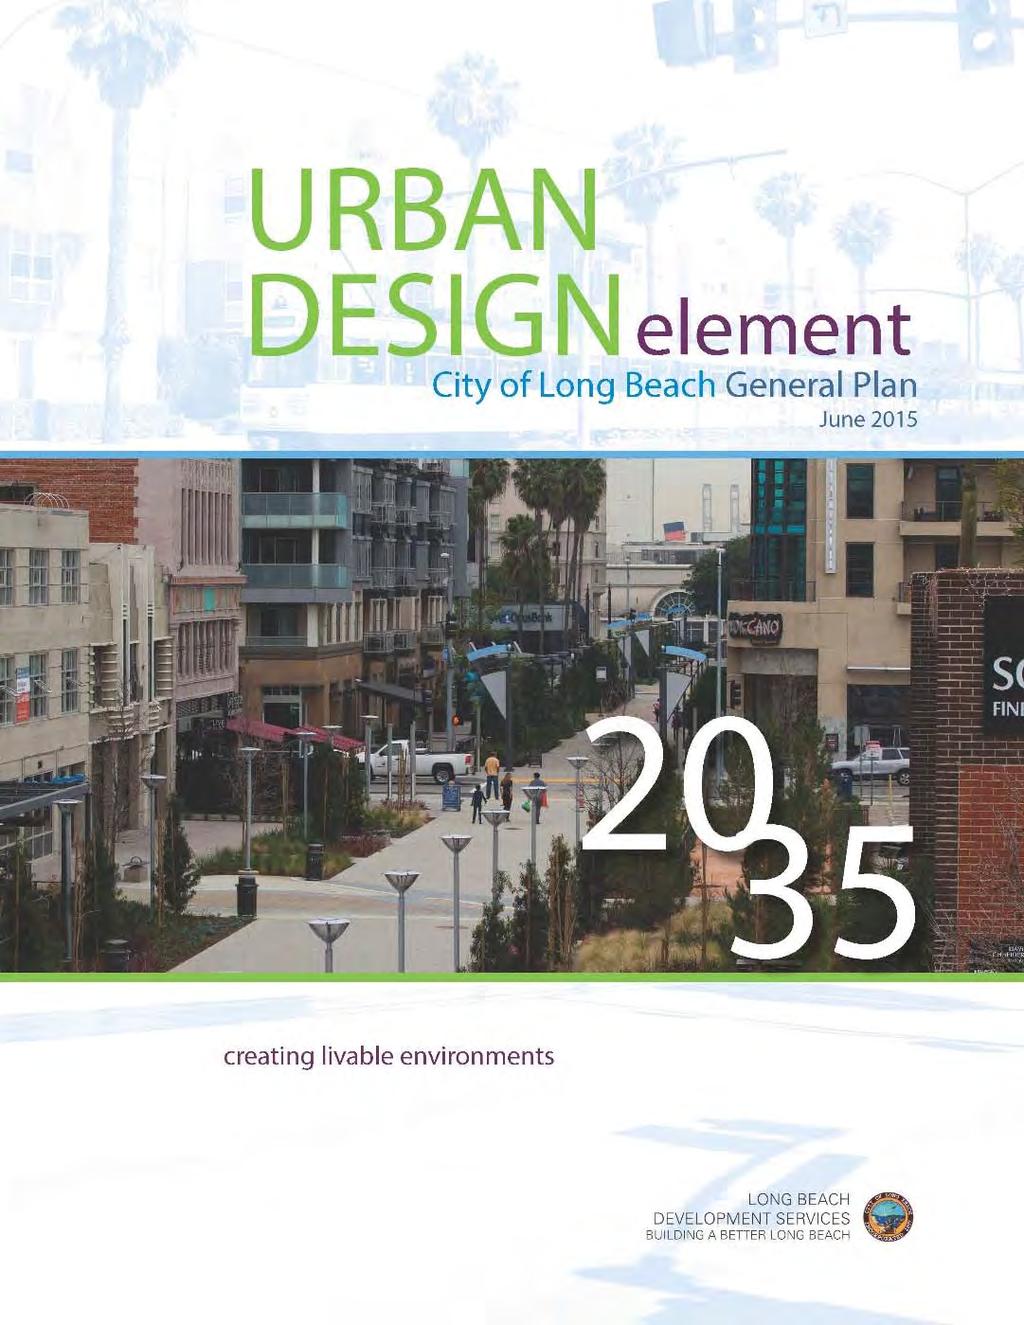 Urban Design Element The Urban Design Element is proposed to address the relationship between buildings as